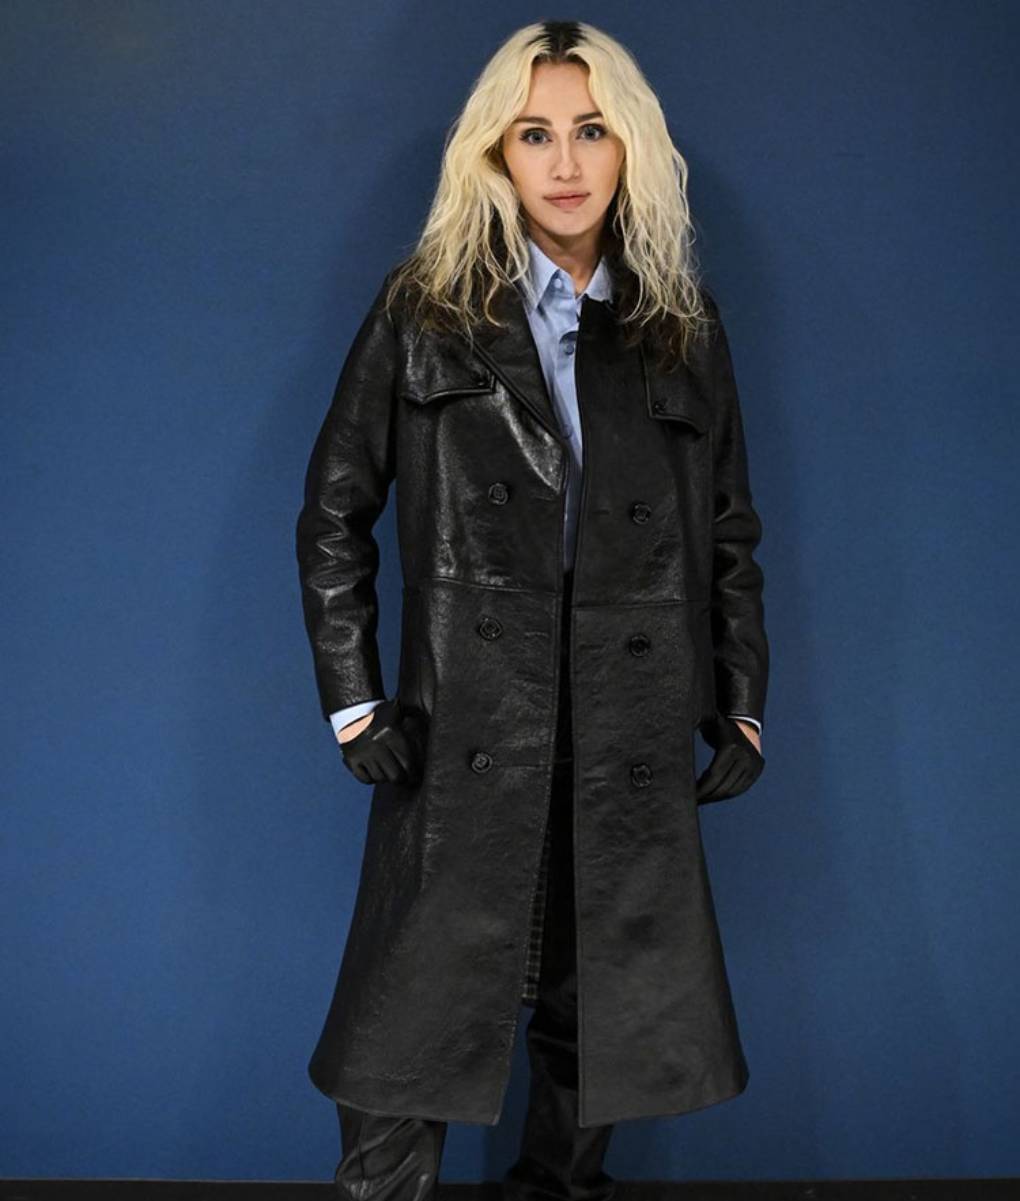 Miley Cyrus Black Leather Trench Coat (2)